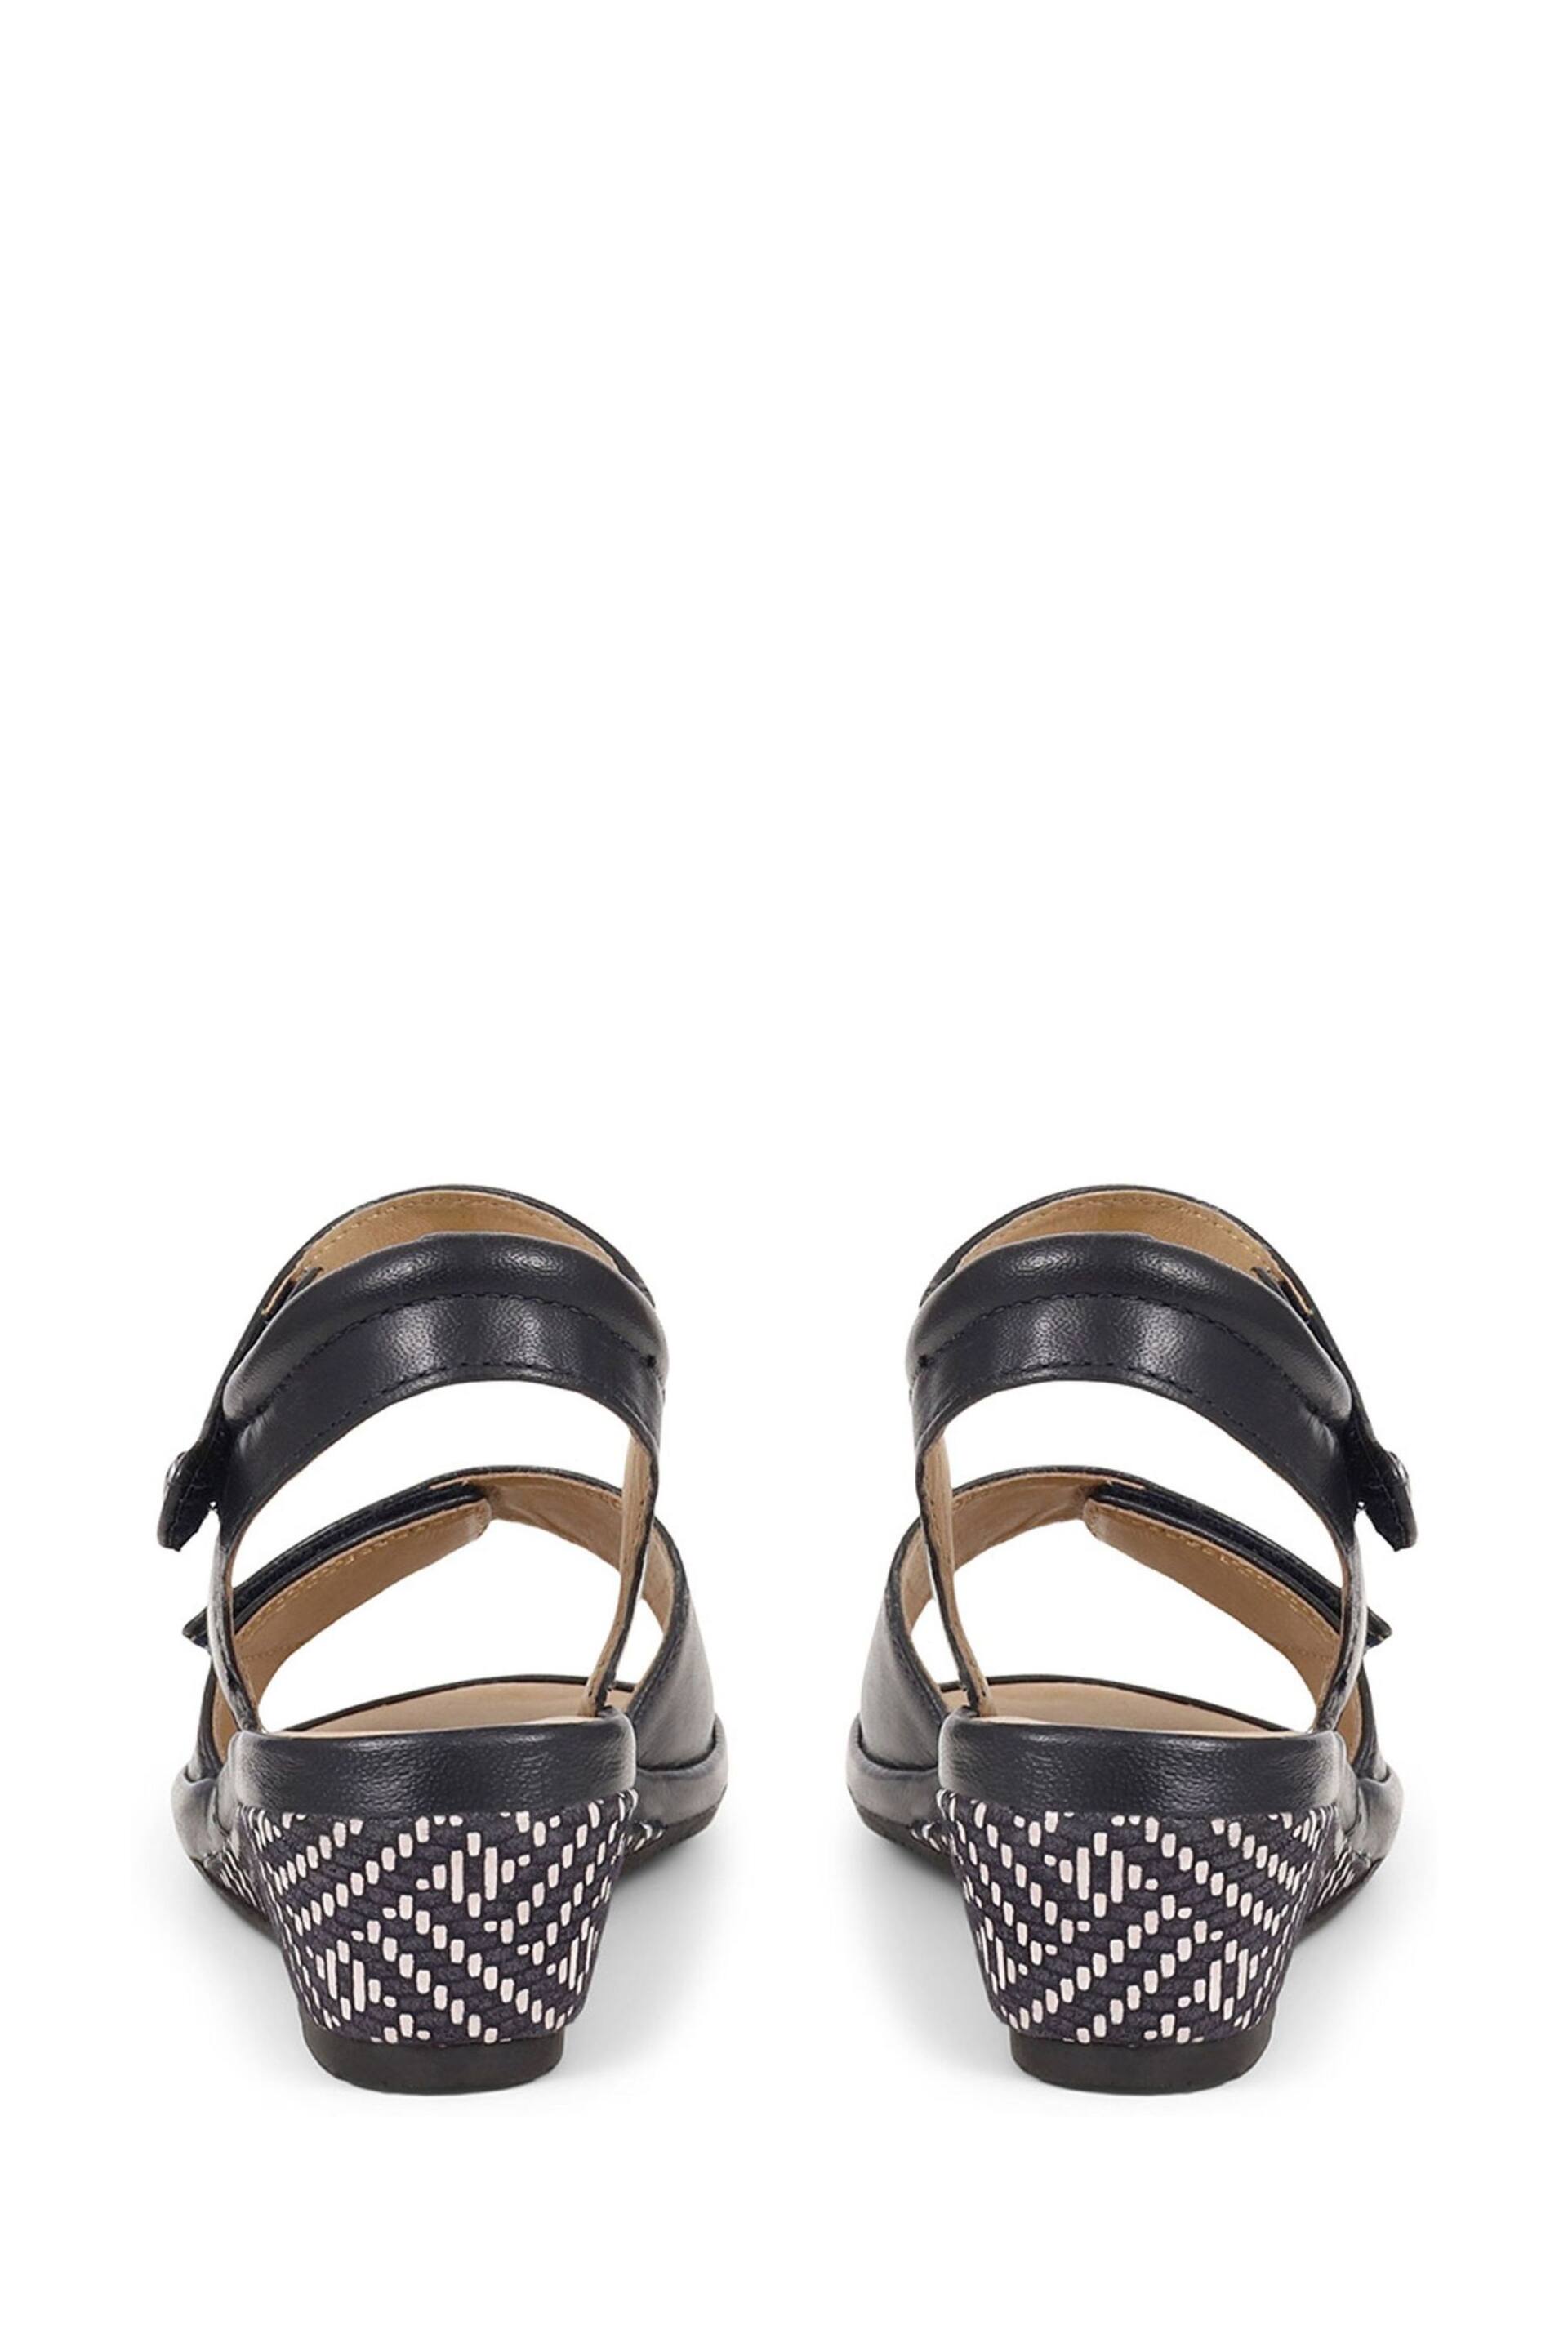 Van Dal Dual Strap Leather Sandals - Image 4 of 6